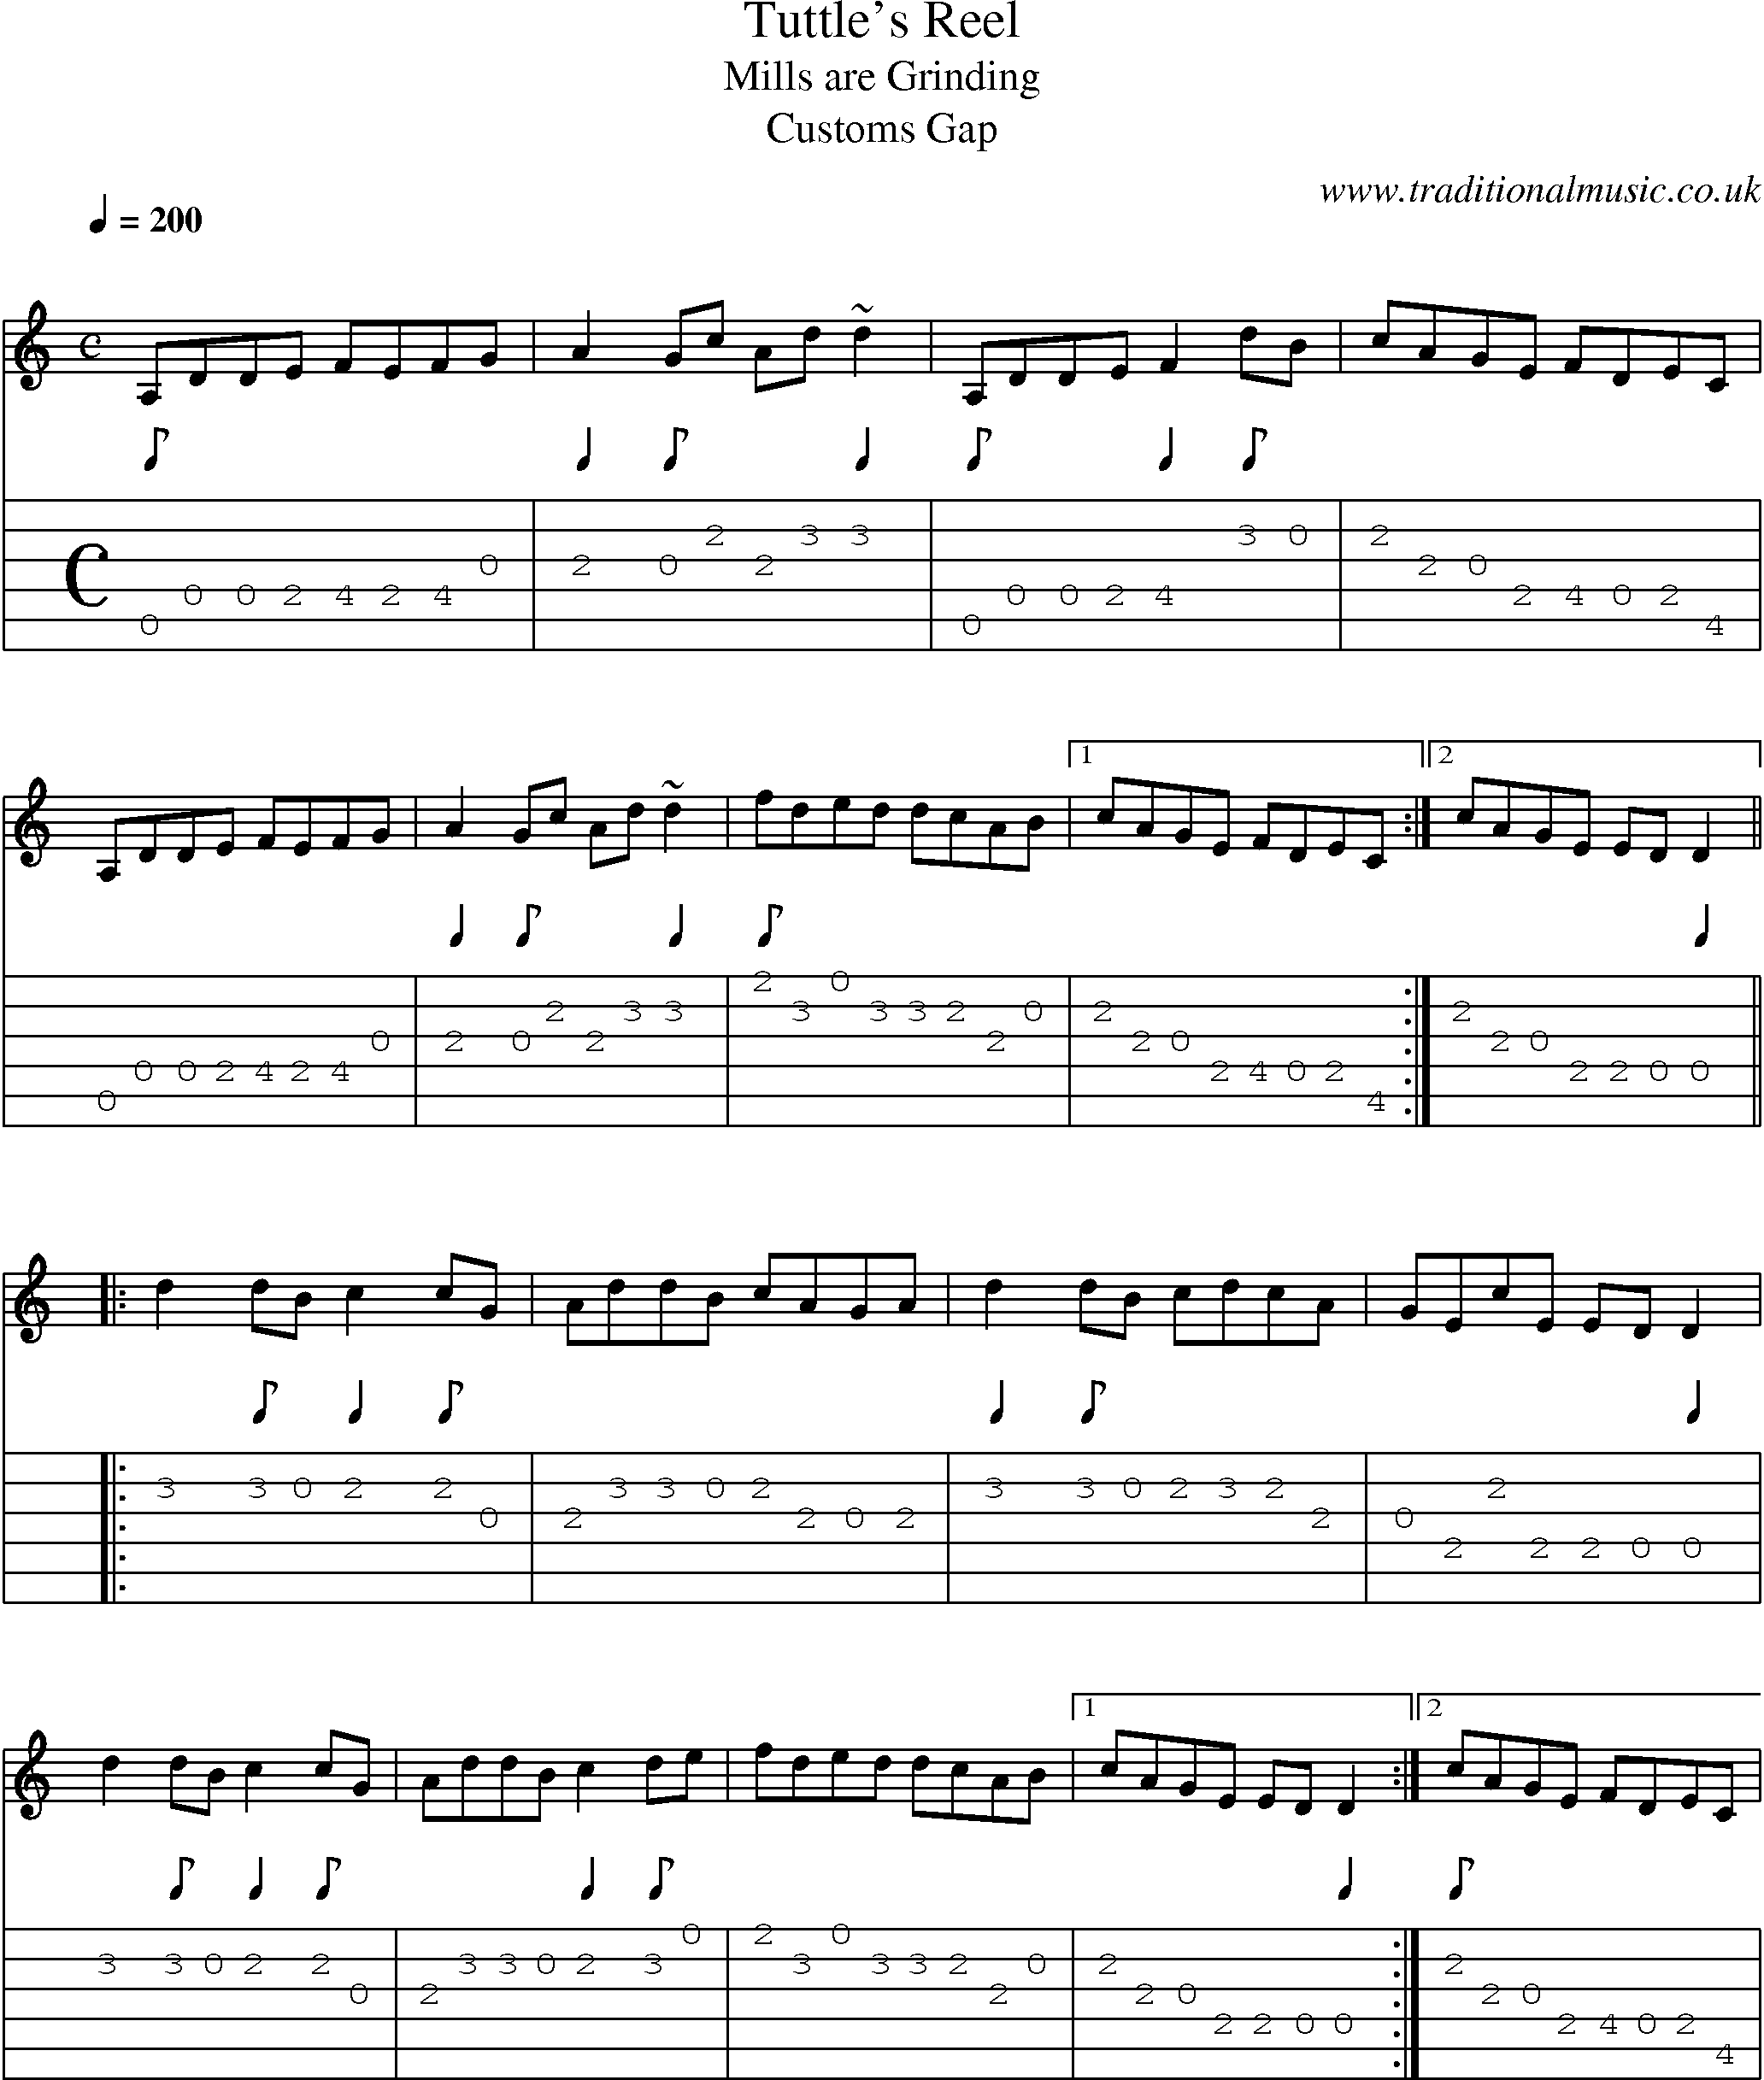 Music Score and Guitar Tabs for Tuttles Reel